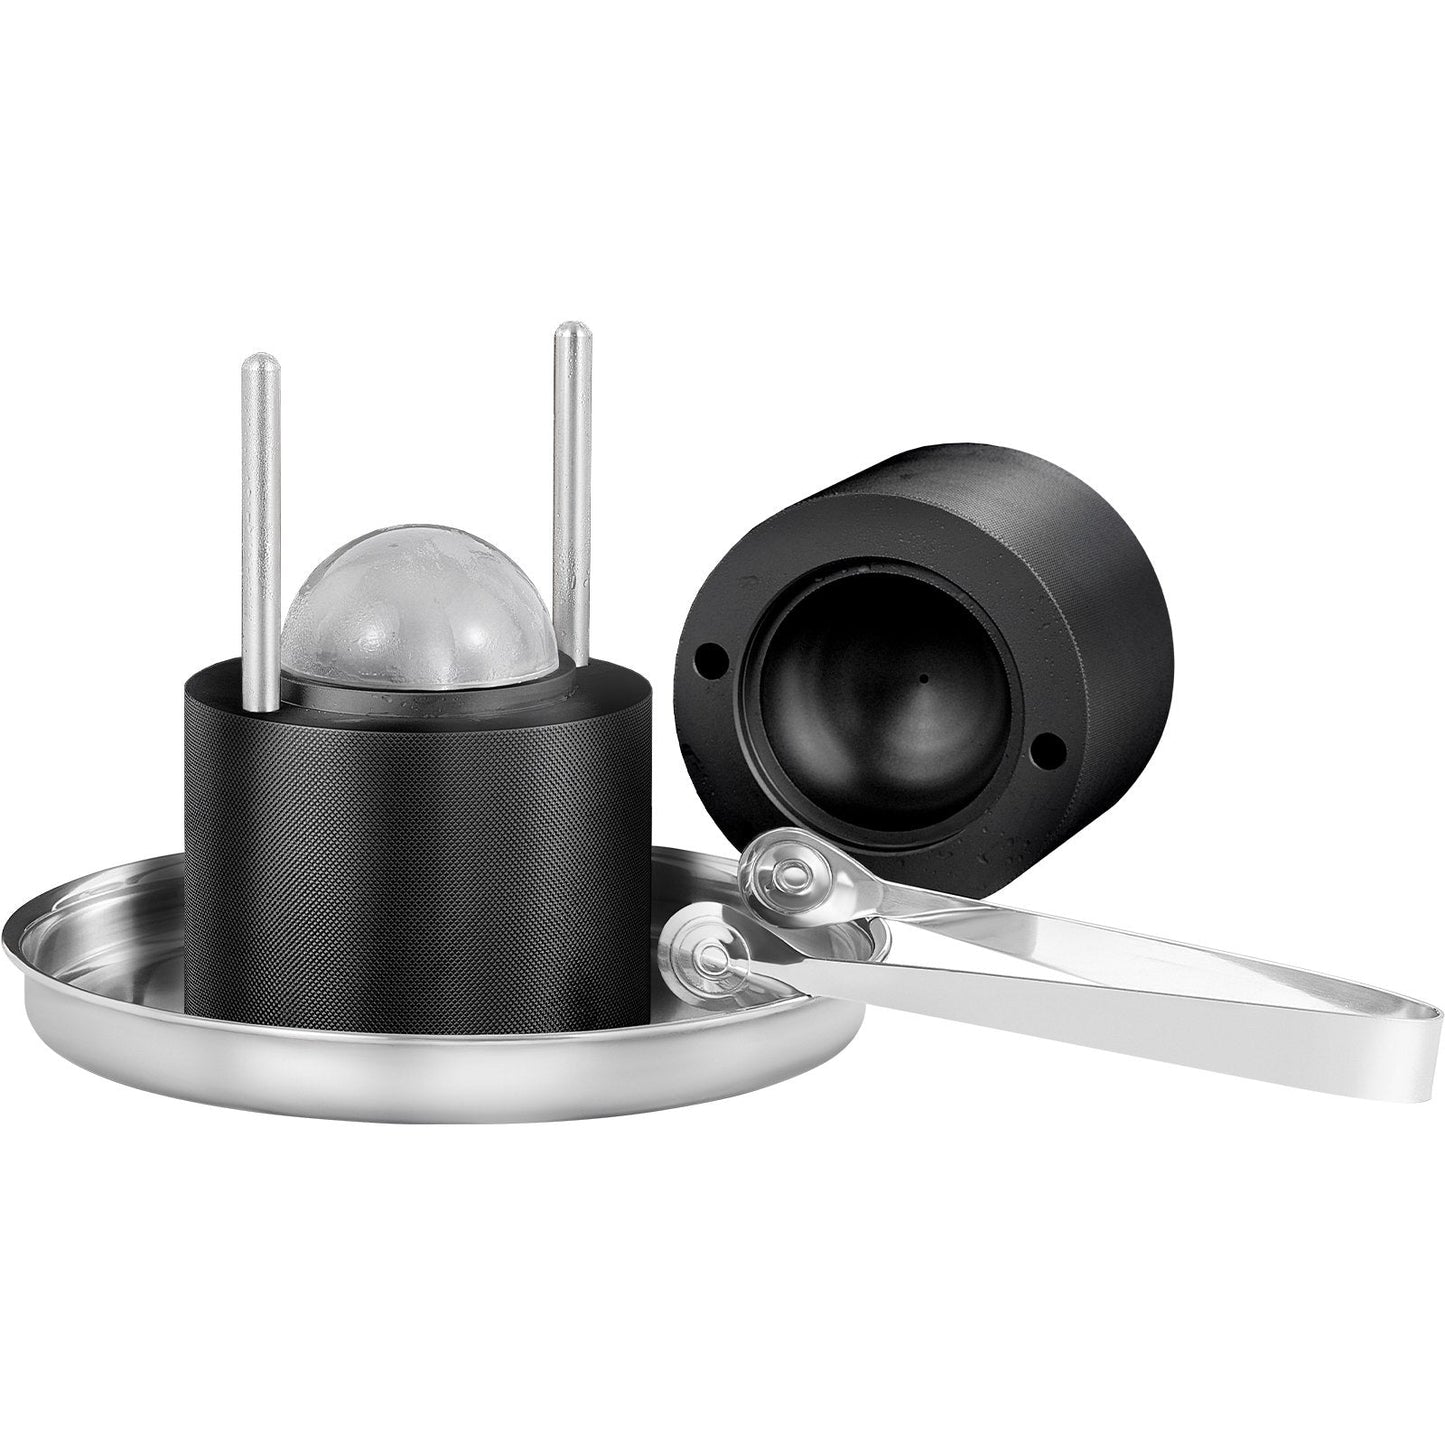 VEVOR Ice Ball Press, 2.4" Ice Ball Maker, Aircraft Al Alloy Ice Ball Press Kit for 60mm Ice Sphere, Ice Press with Tong and Drip Tray, for Whiskey, Cocktail, Bourbon, Scot on Party & Holiday, Black-7